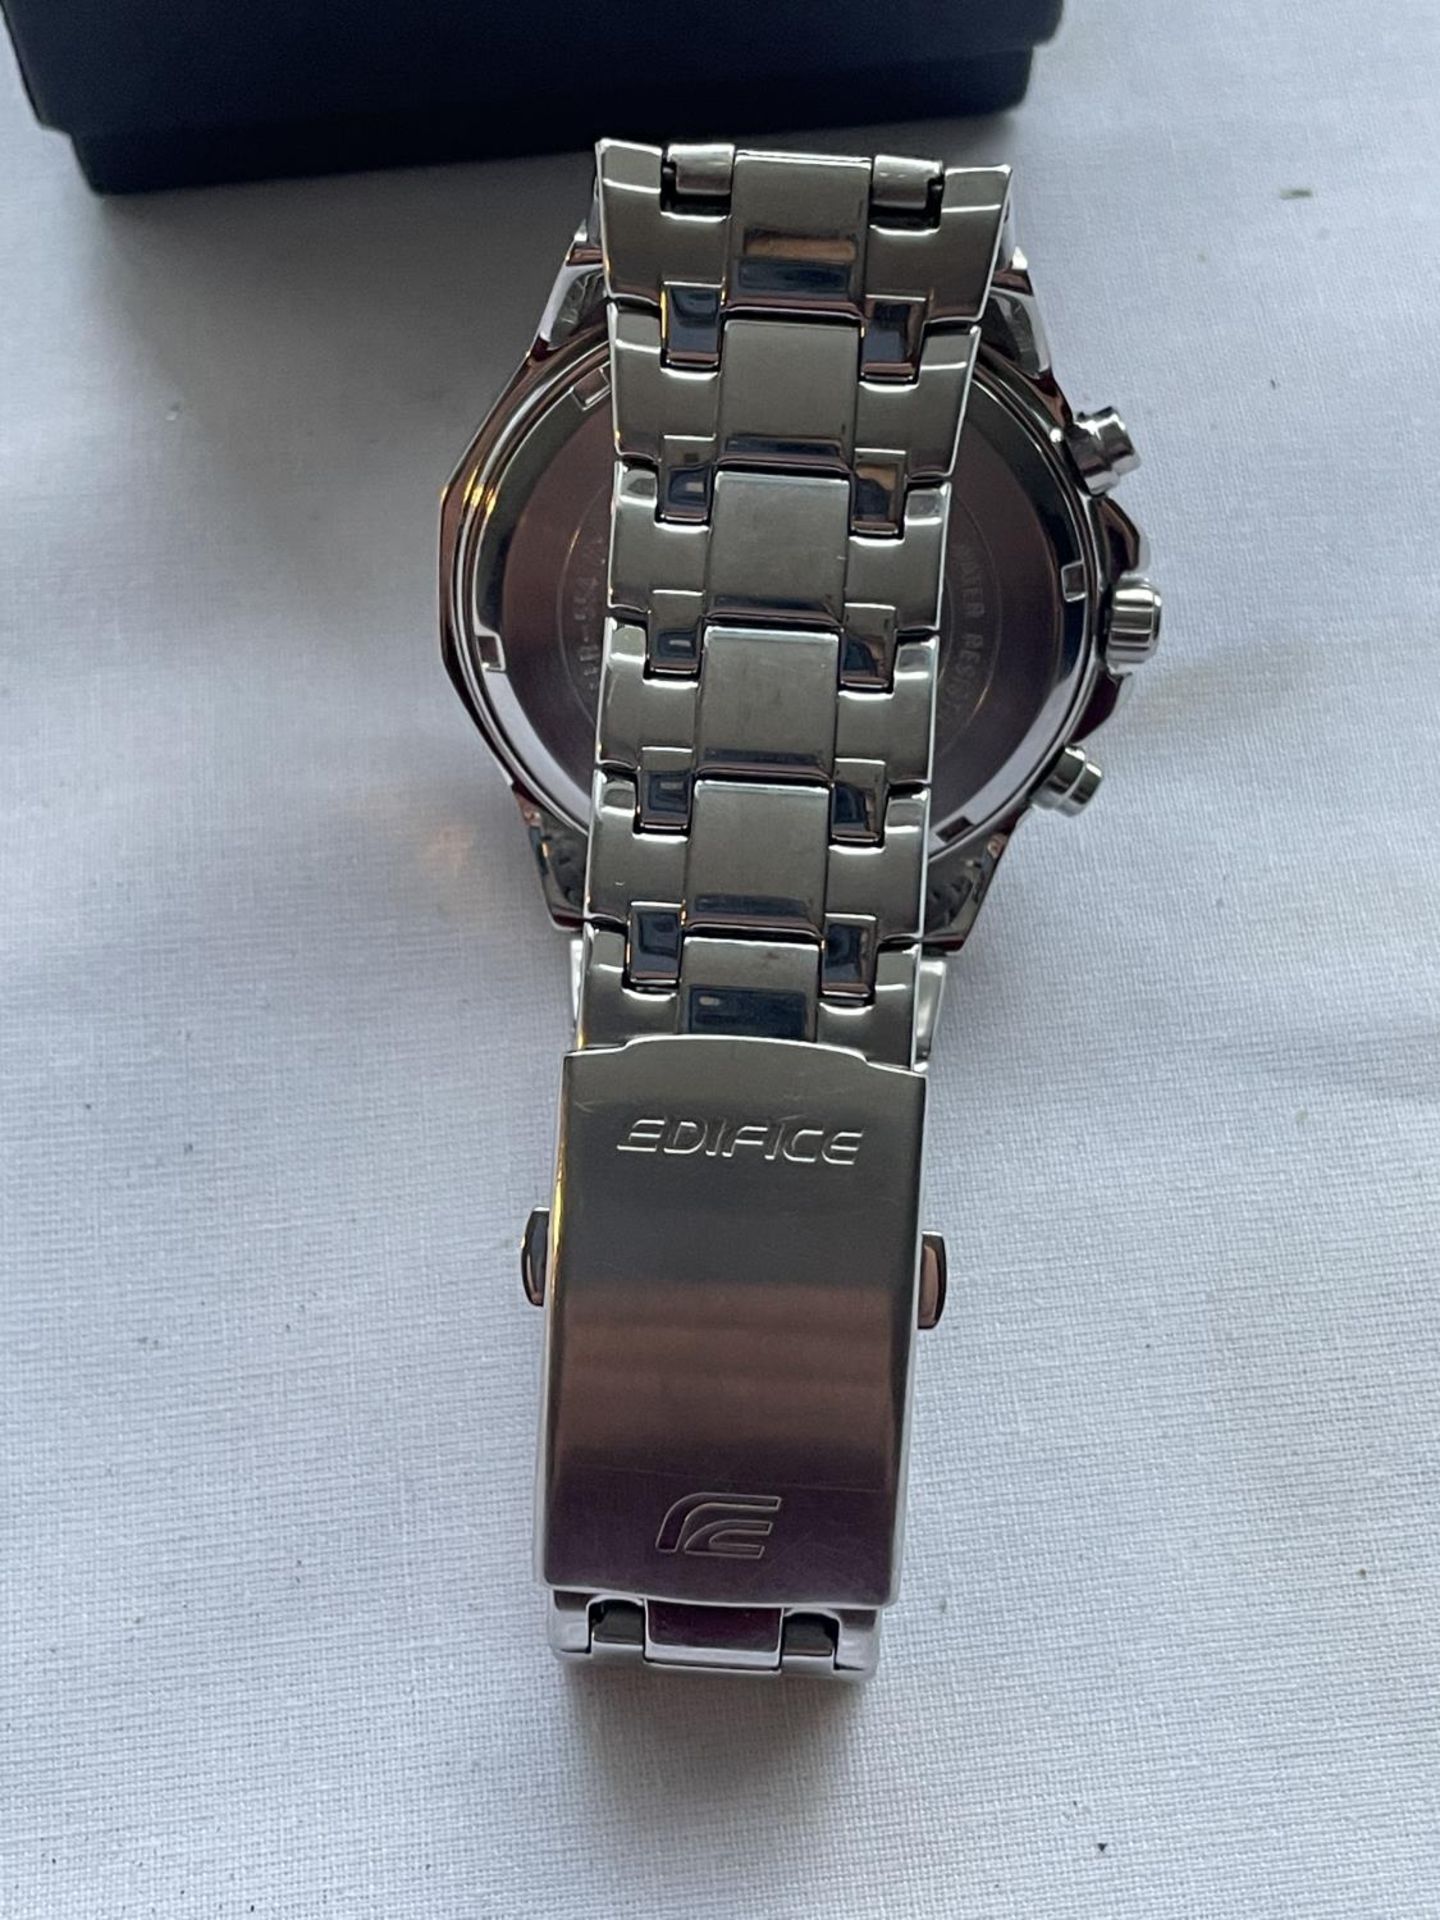 AN AS NEW AND BOXED CASIO EDIFICE WRIST WATCH SEEN WORKING BUT NO WARRANTY - Image 3 of 4